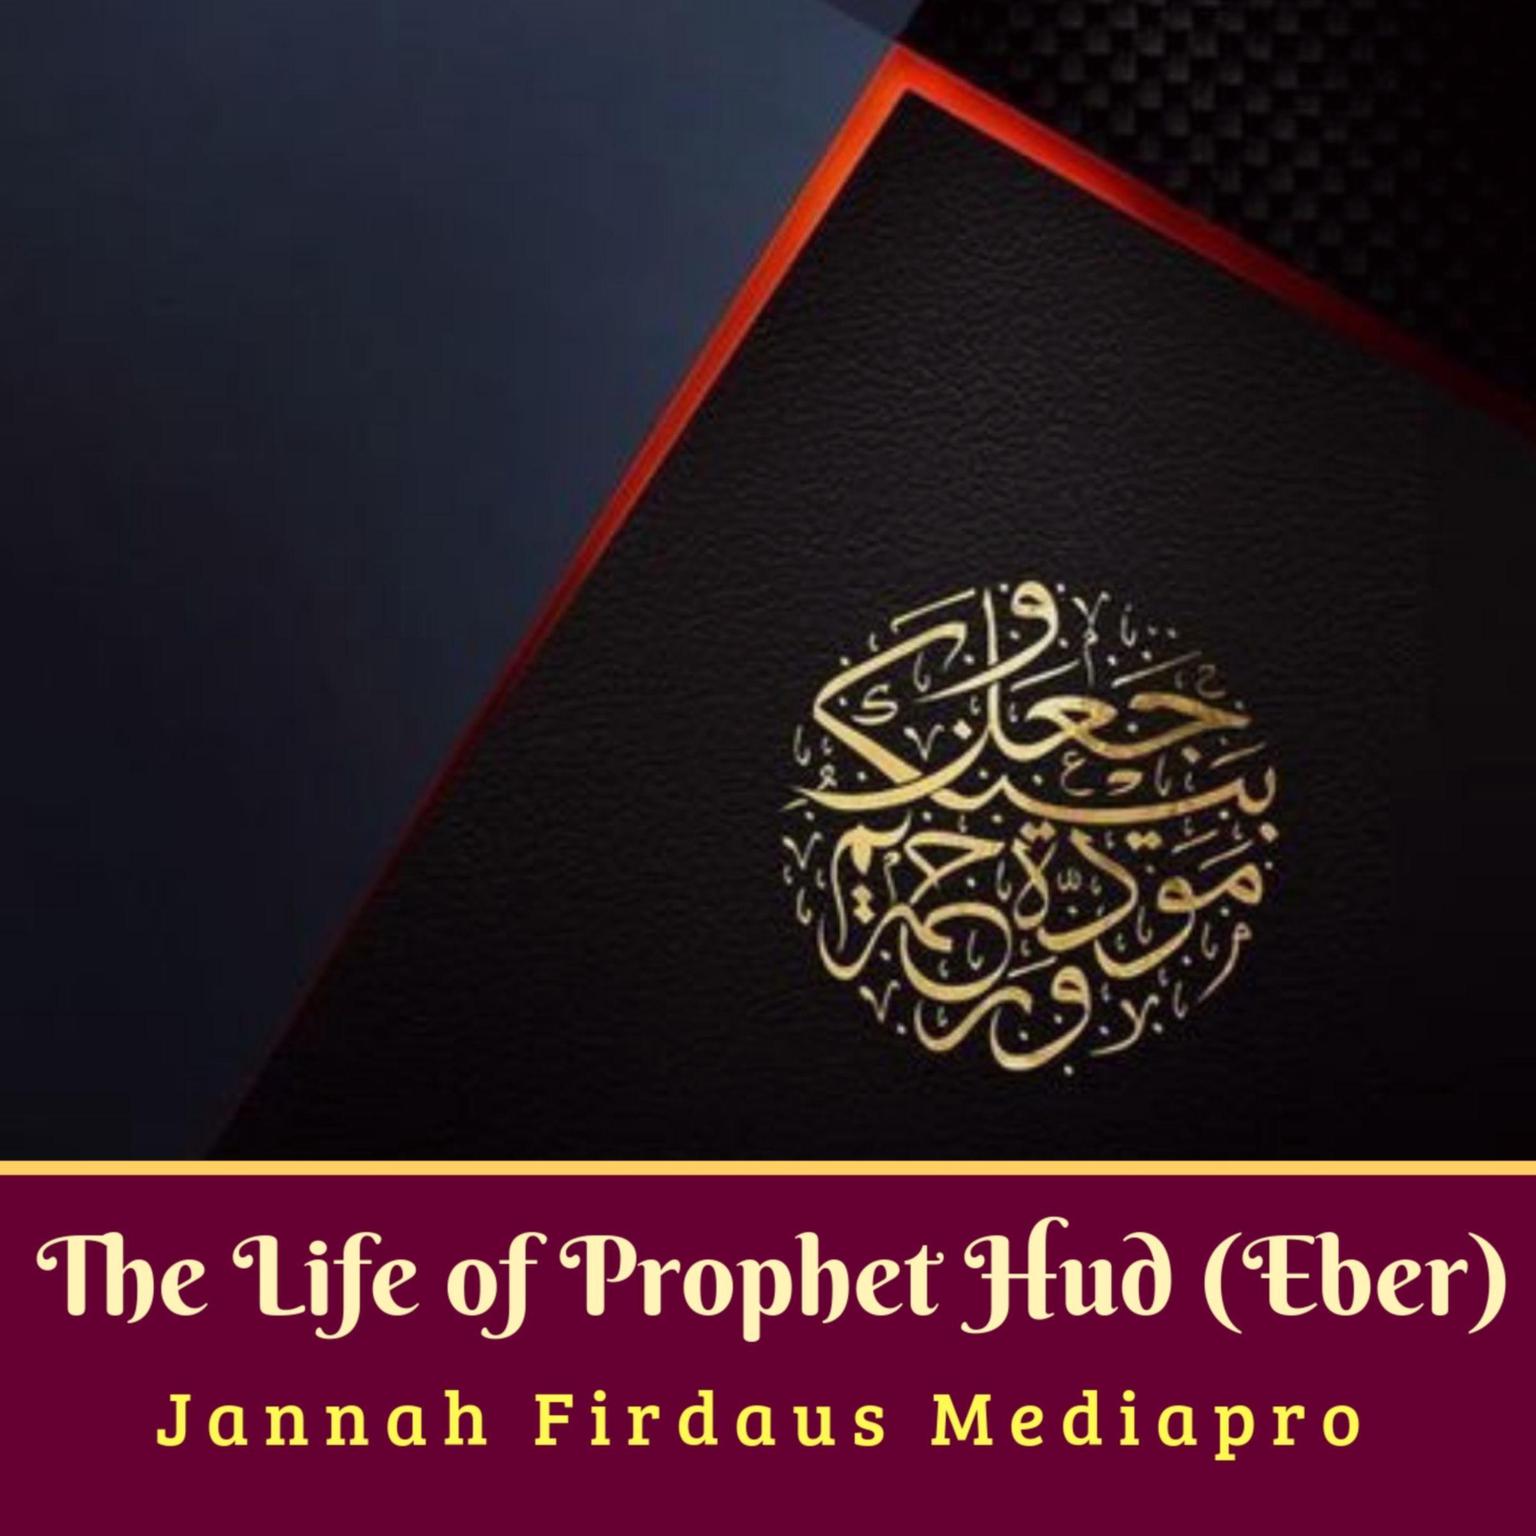 The Life of Prophet Hud (Eber) Audiobook, by Jannah Firdaus Foundation